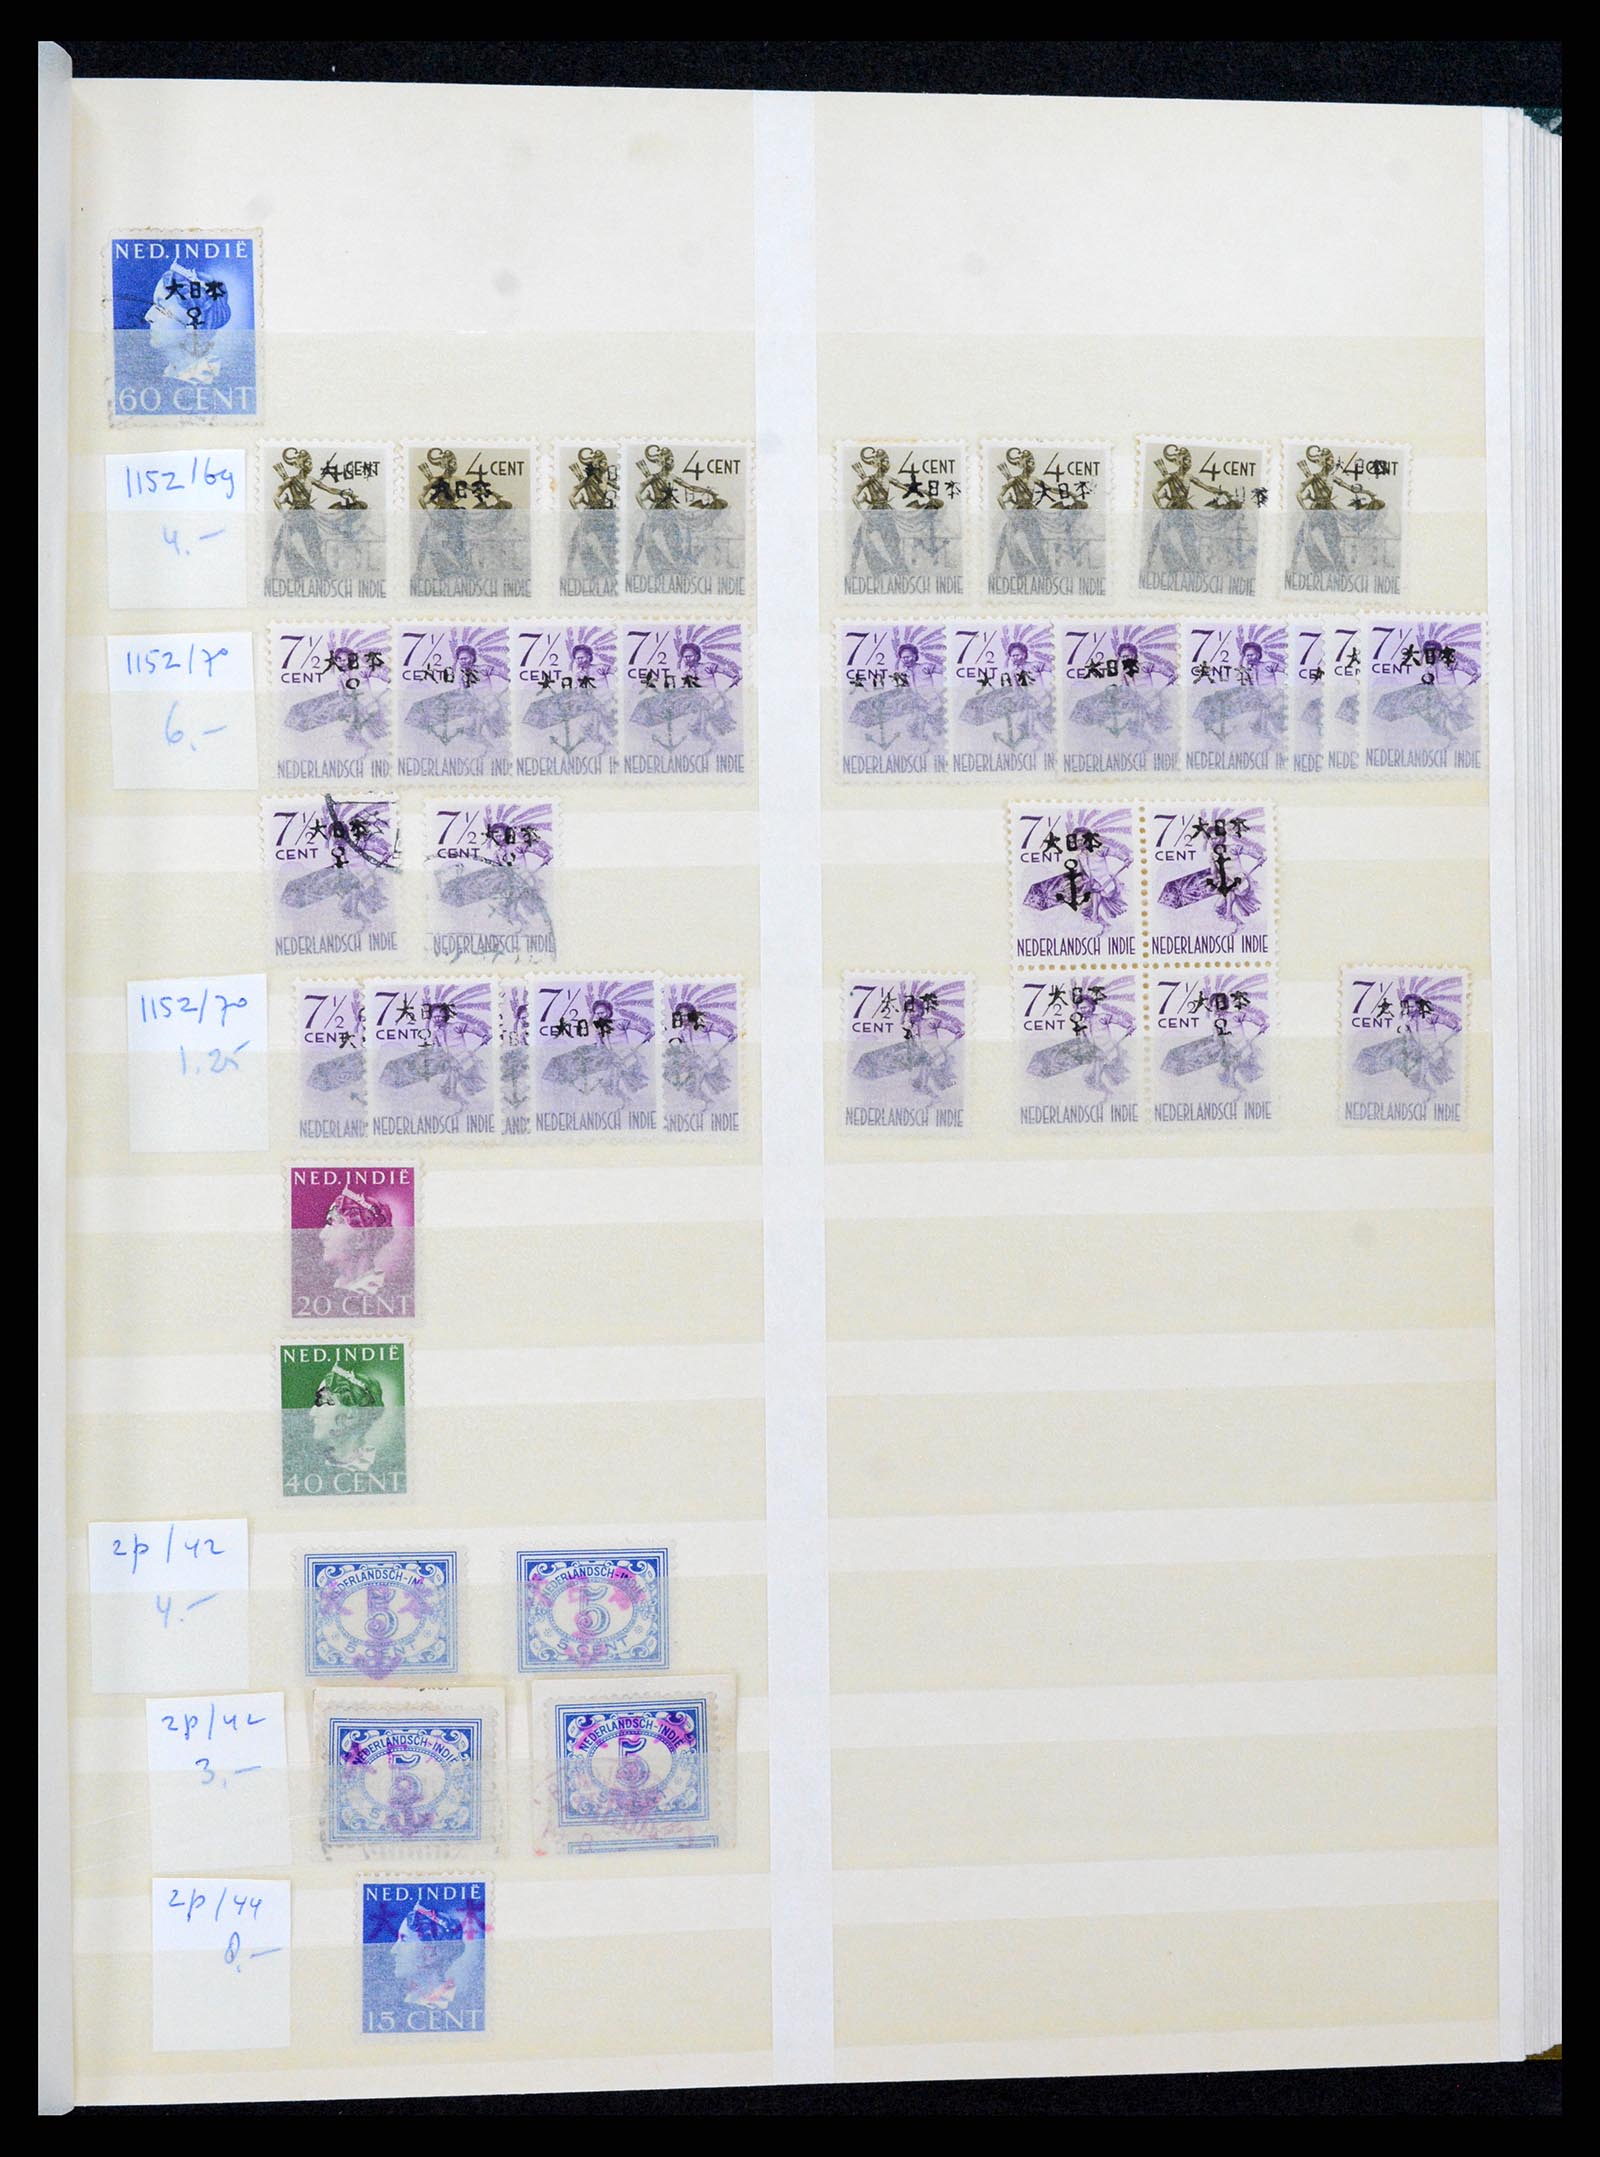 37429 023 - Stamp collection 37429 Japanese occupation Dutch East Indies 1942-1945.